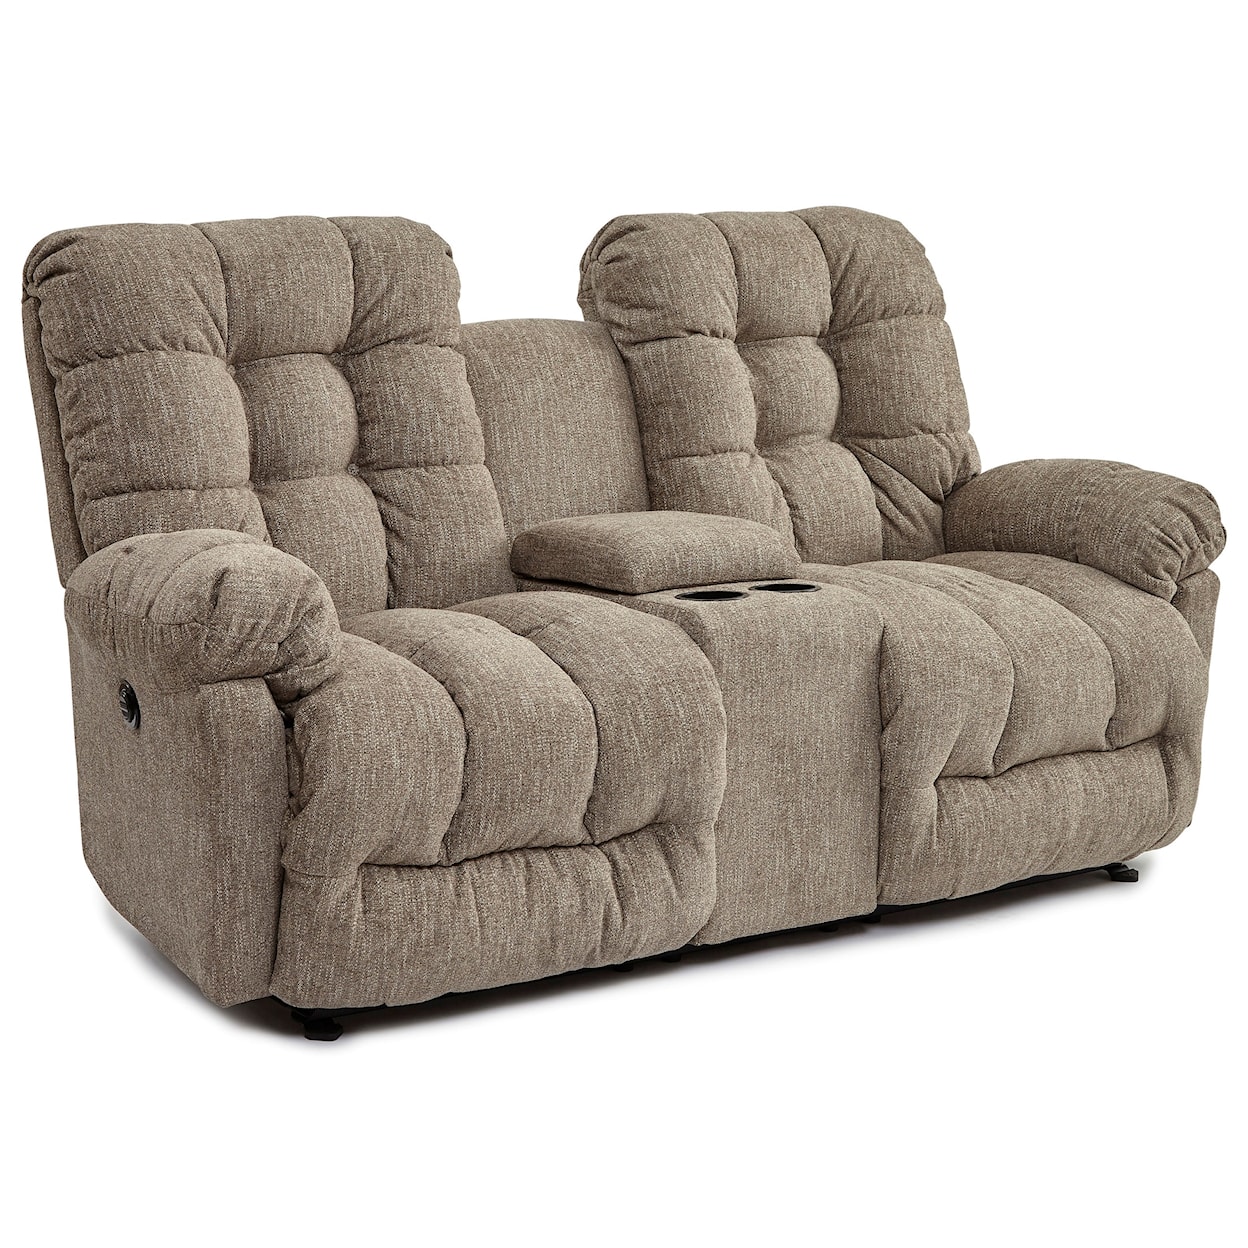 Best Home Furnishings Everlasting Power Wall Reclining Loveseat w/ Console